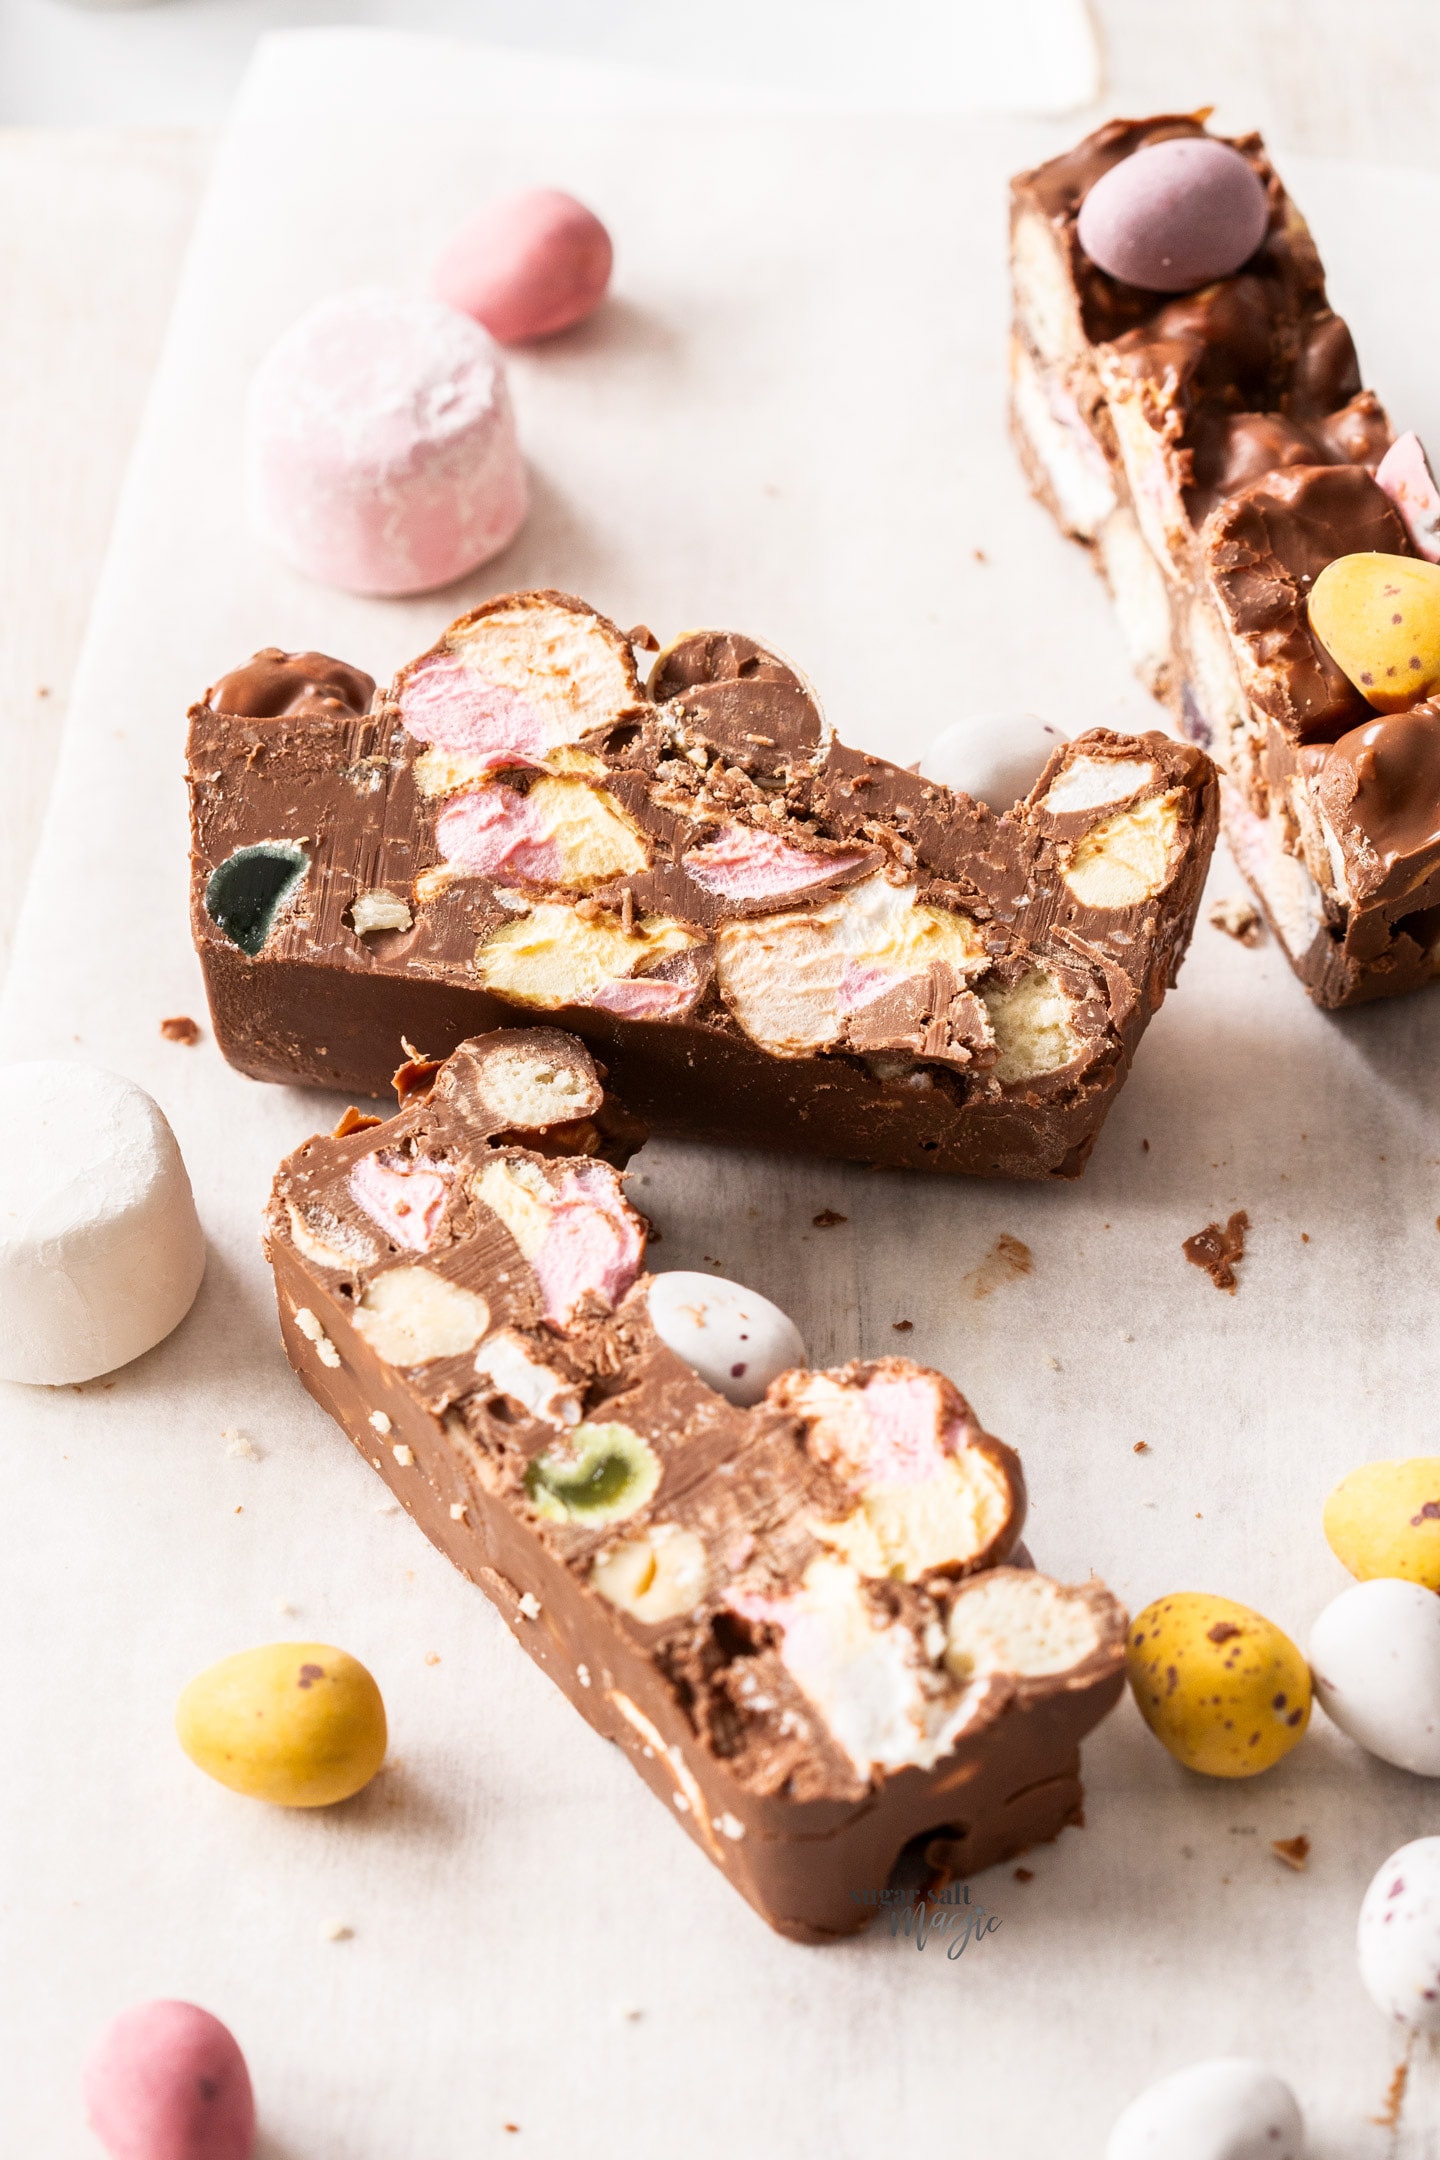 3 slices of rocky road with easter eggs in it.